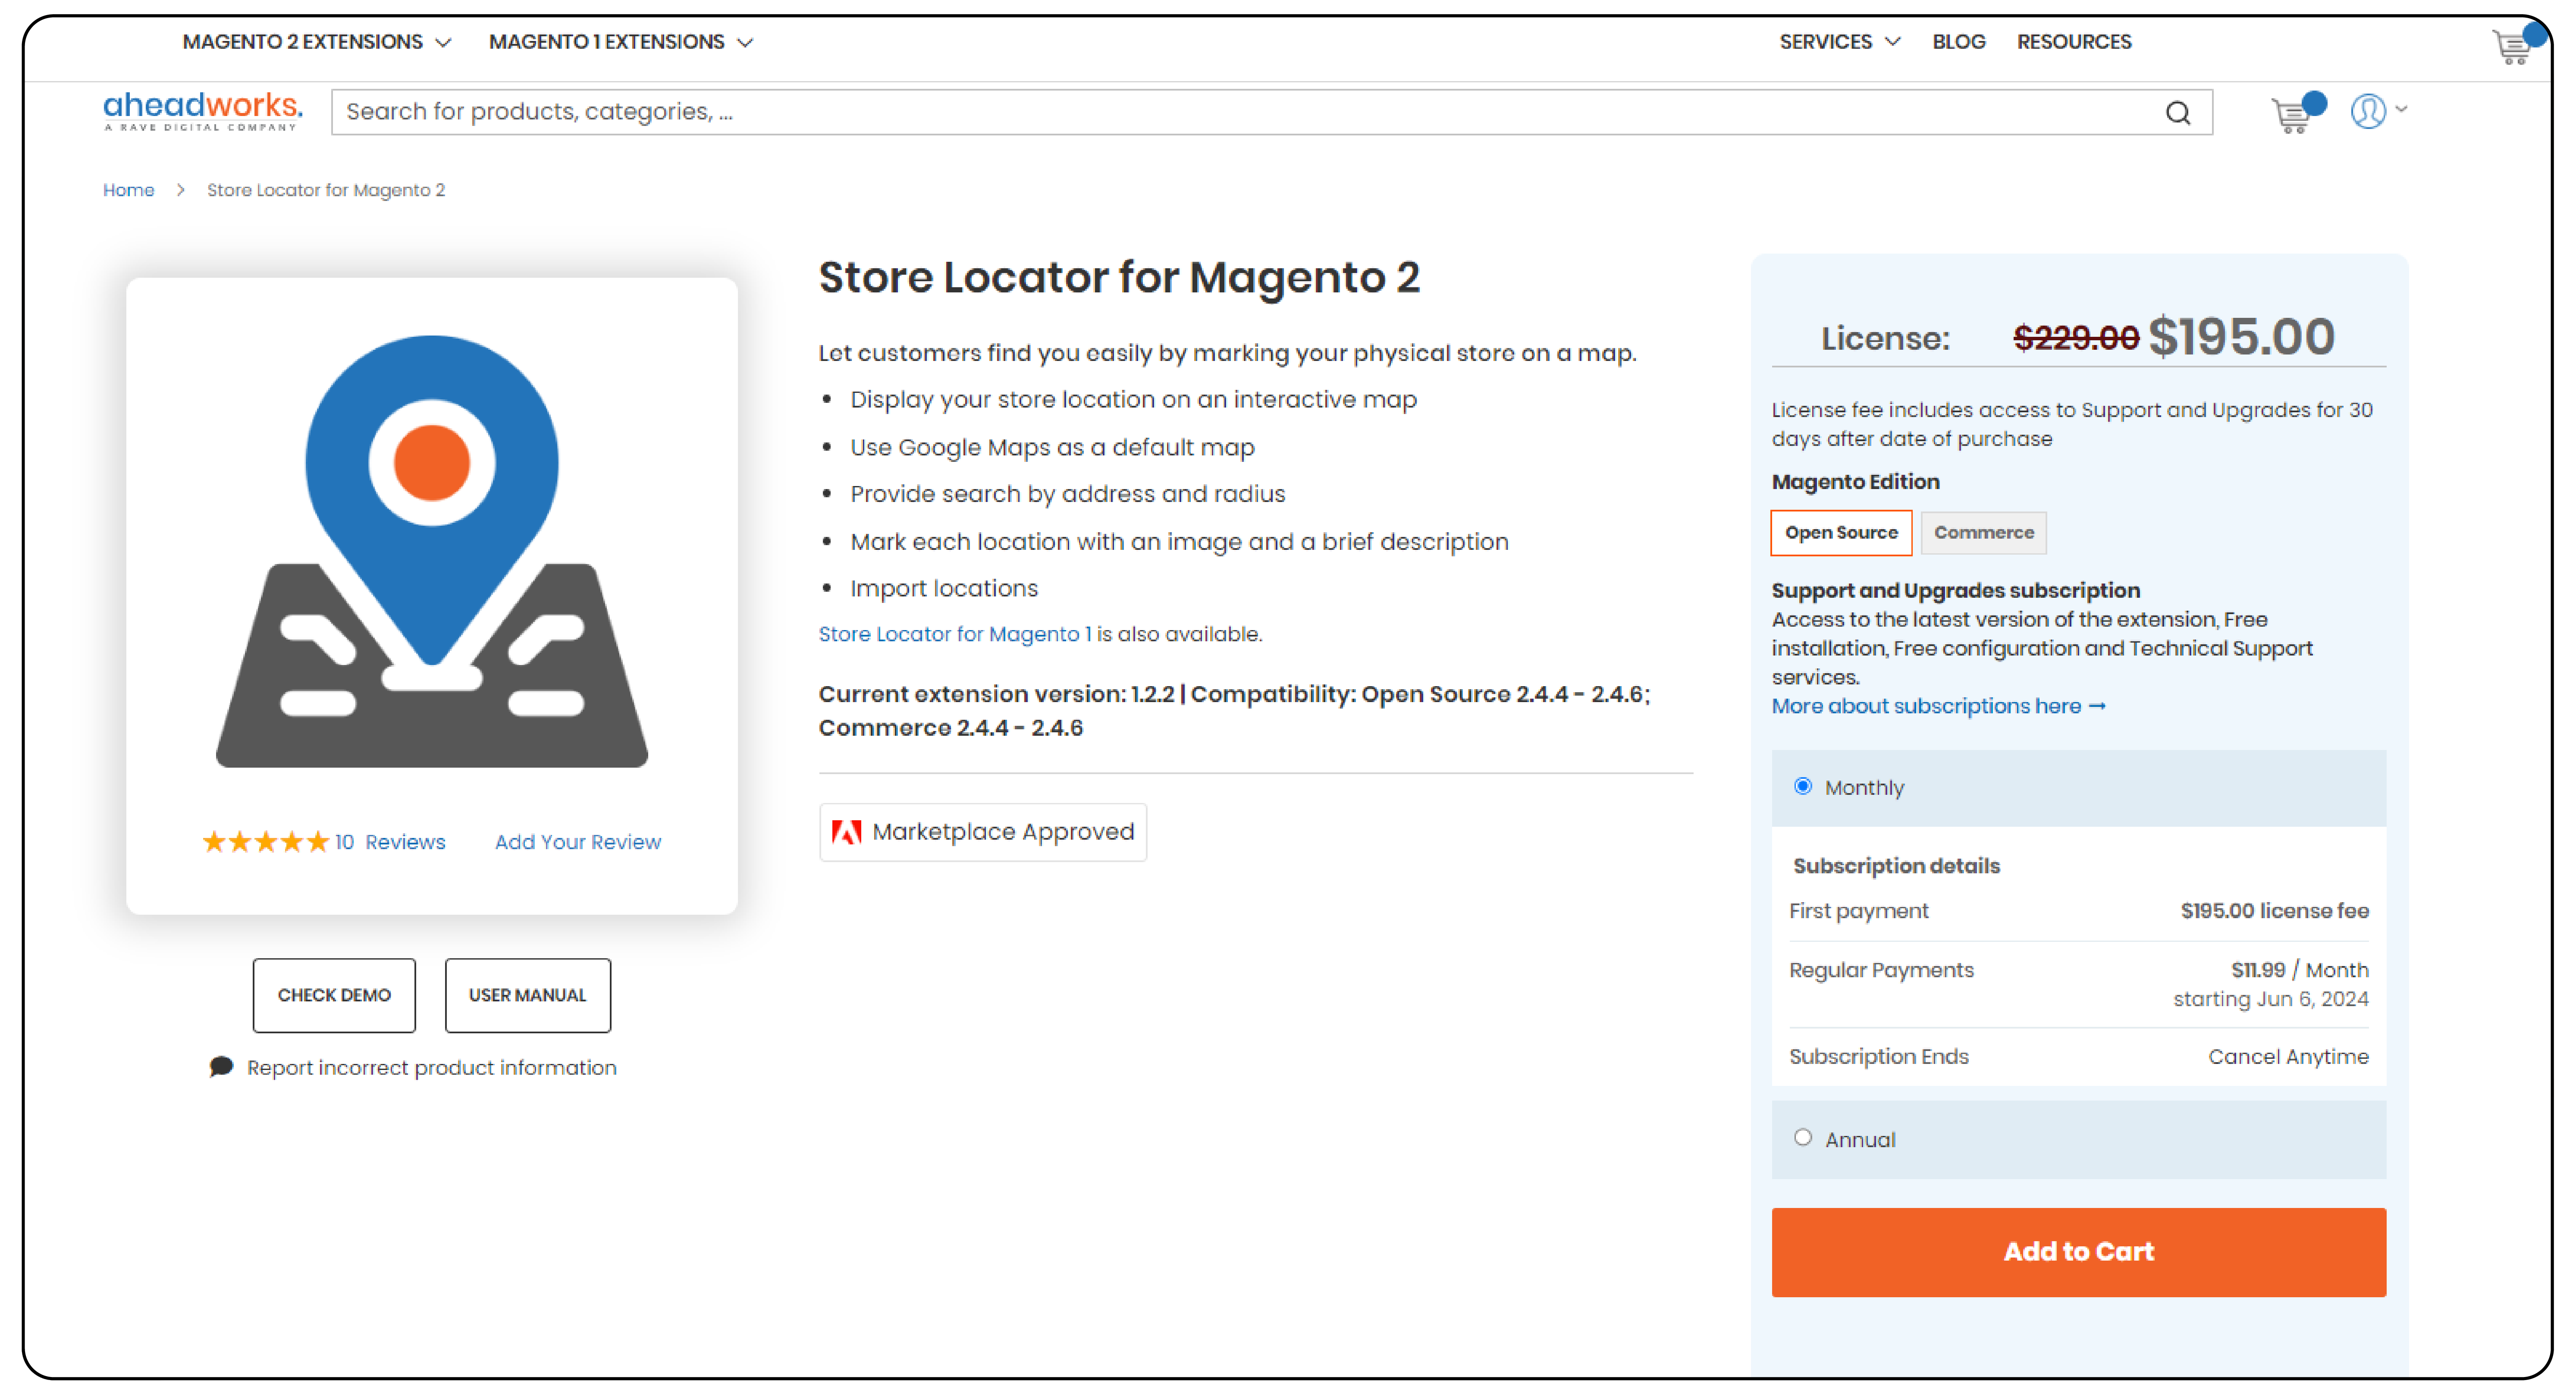 Aheadworks Store Locator for Magento 2